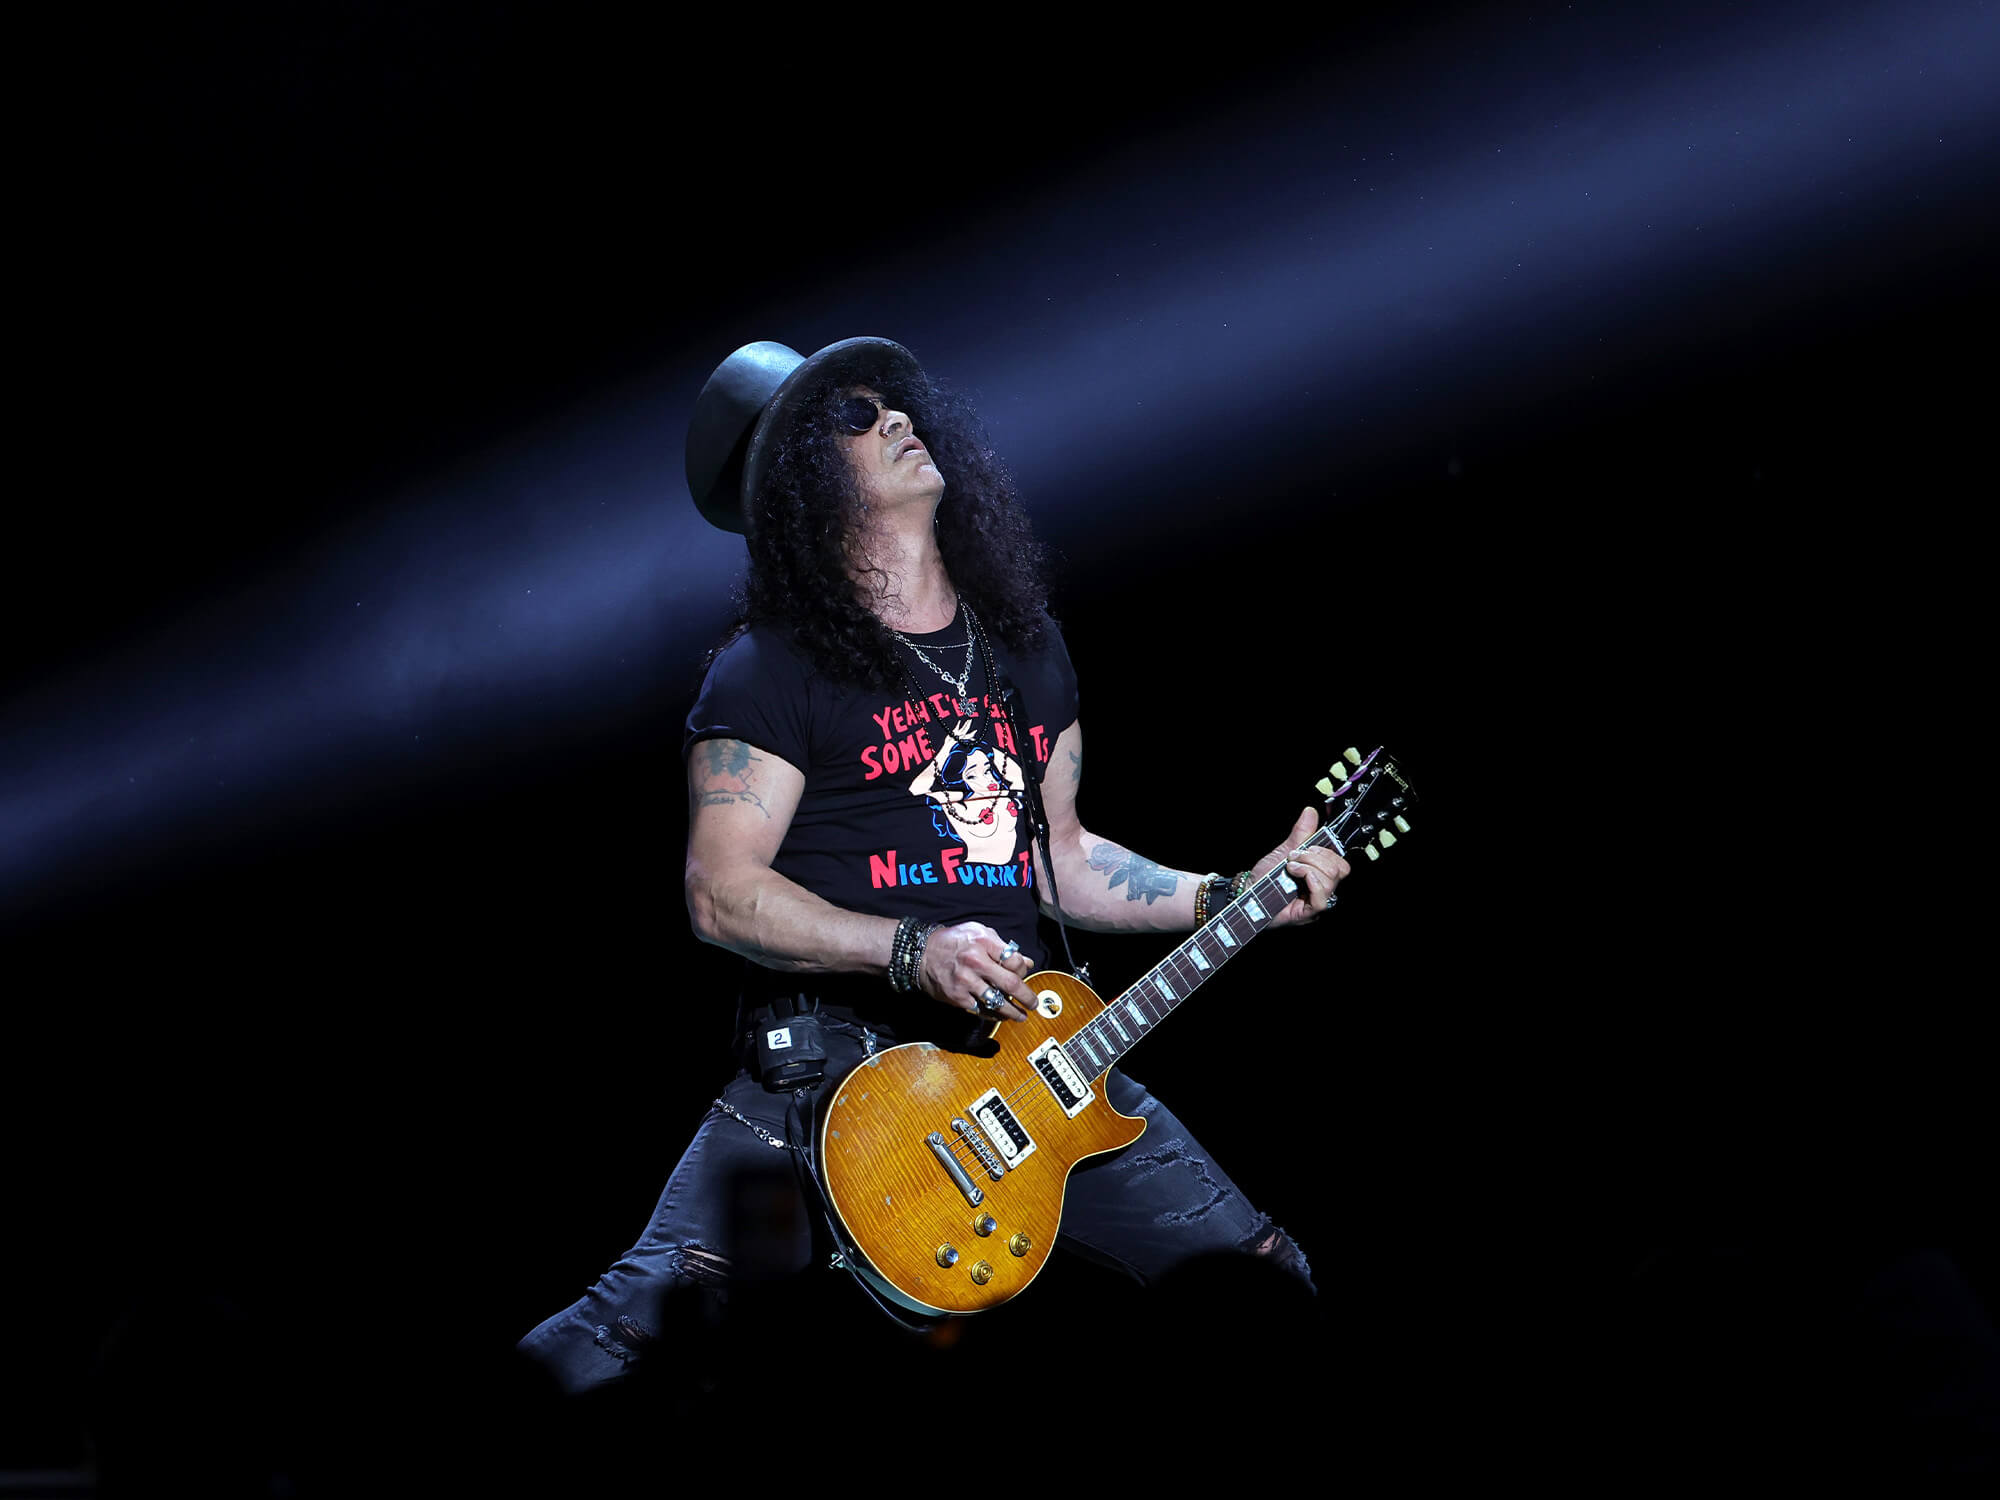 Slash playing his Les Paul on stage. He is wearing his famous top hat and is looking up.